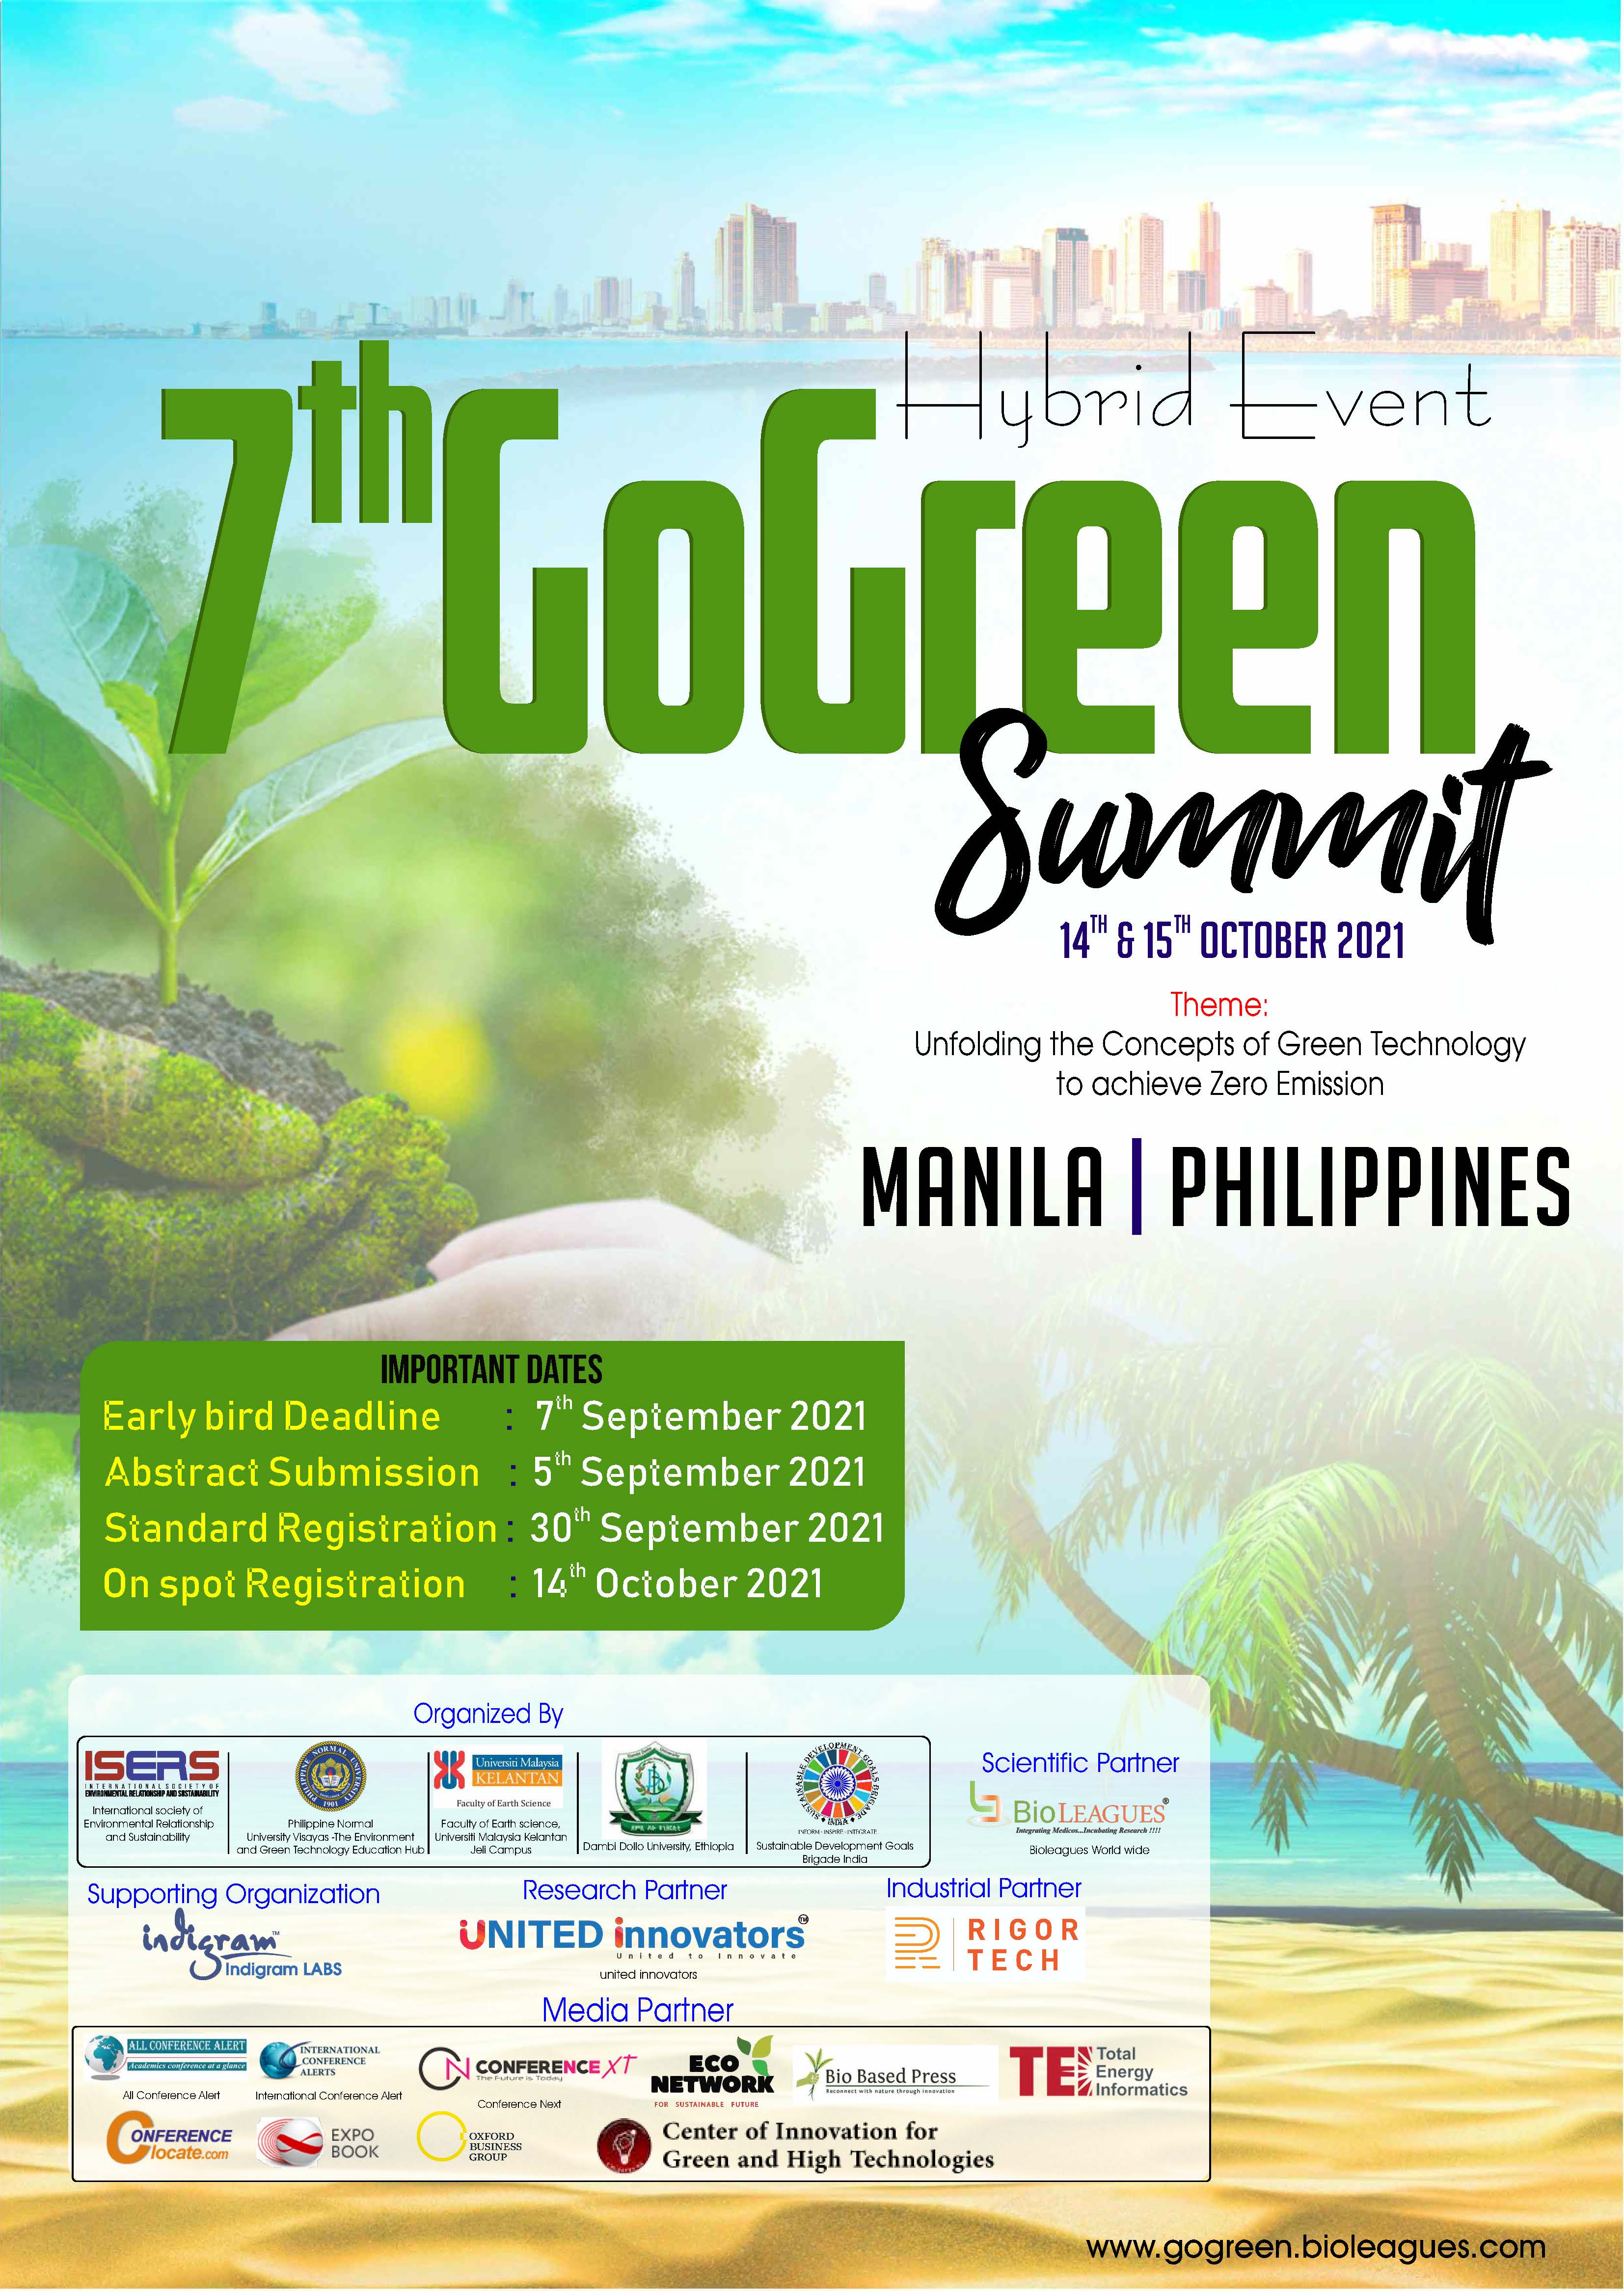 7th Go Green Summit: Unfolding the Concepts of Green Technology to achieve Zero Emission (Manila | Philippines)